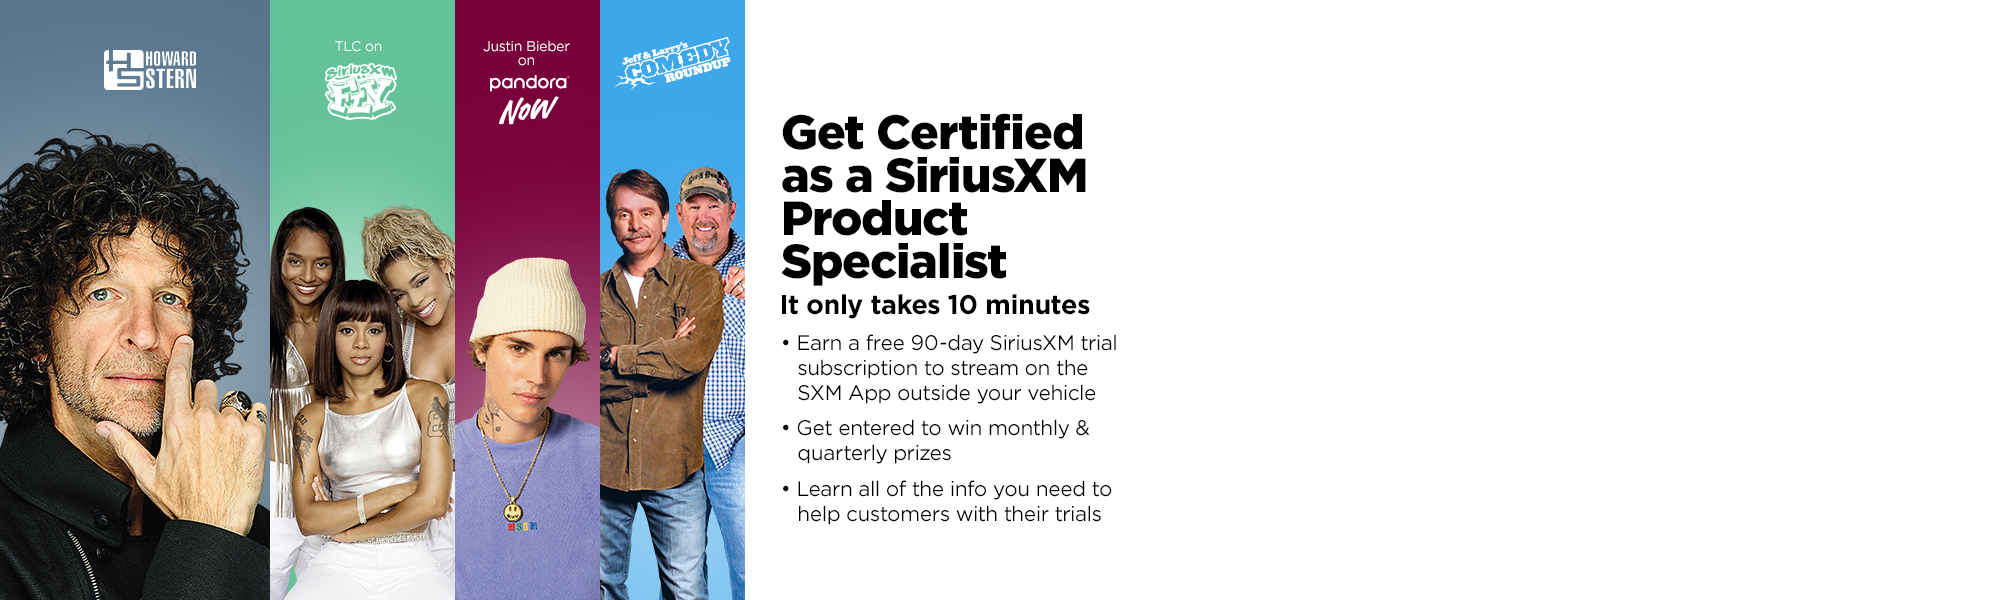 Take SiriusXM e-Learning course to get certified as a SiriusXM Product Specialist, earn a free 90-day trial subscription 